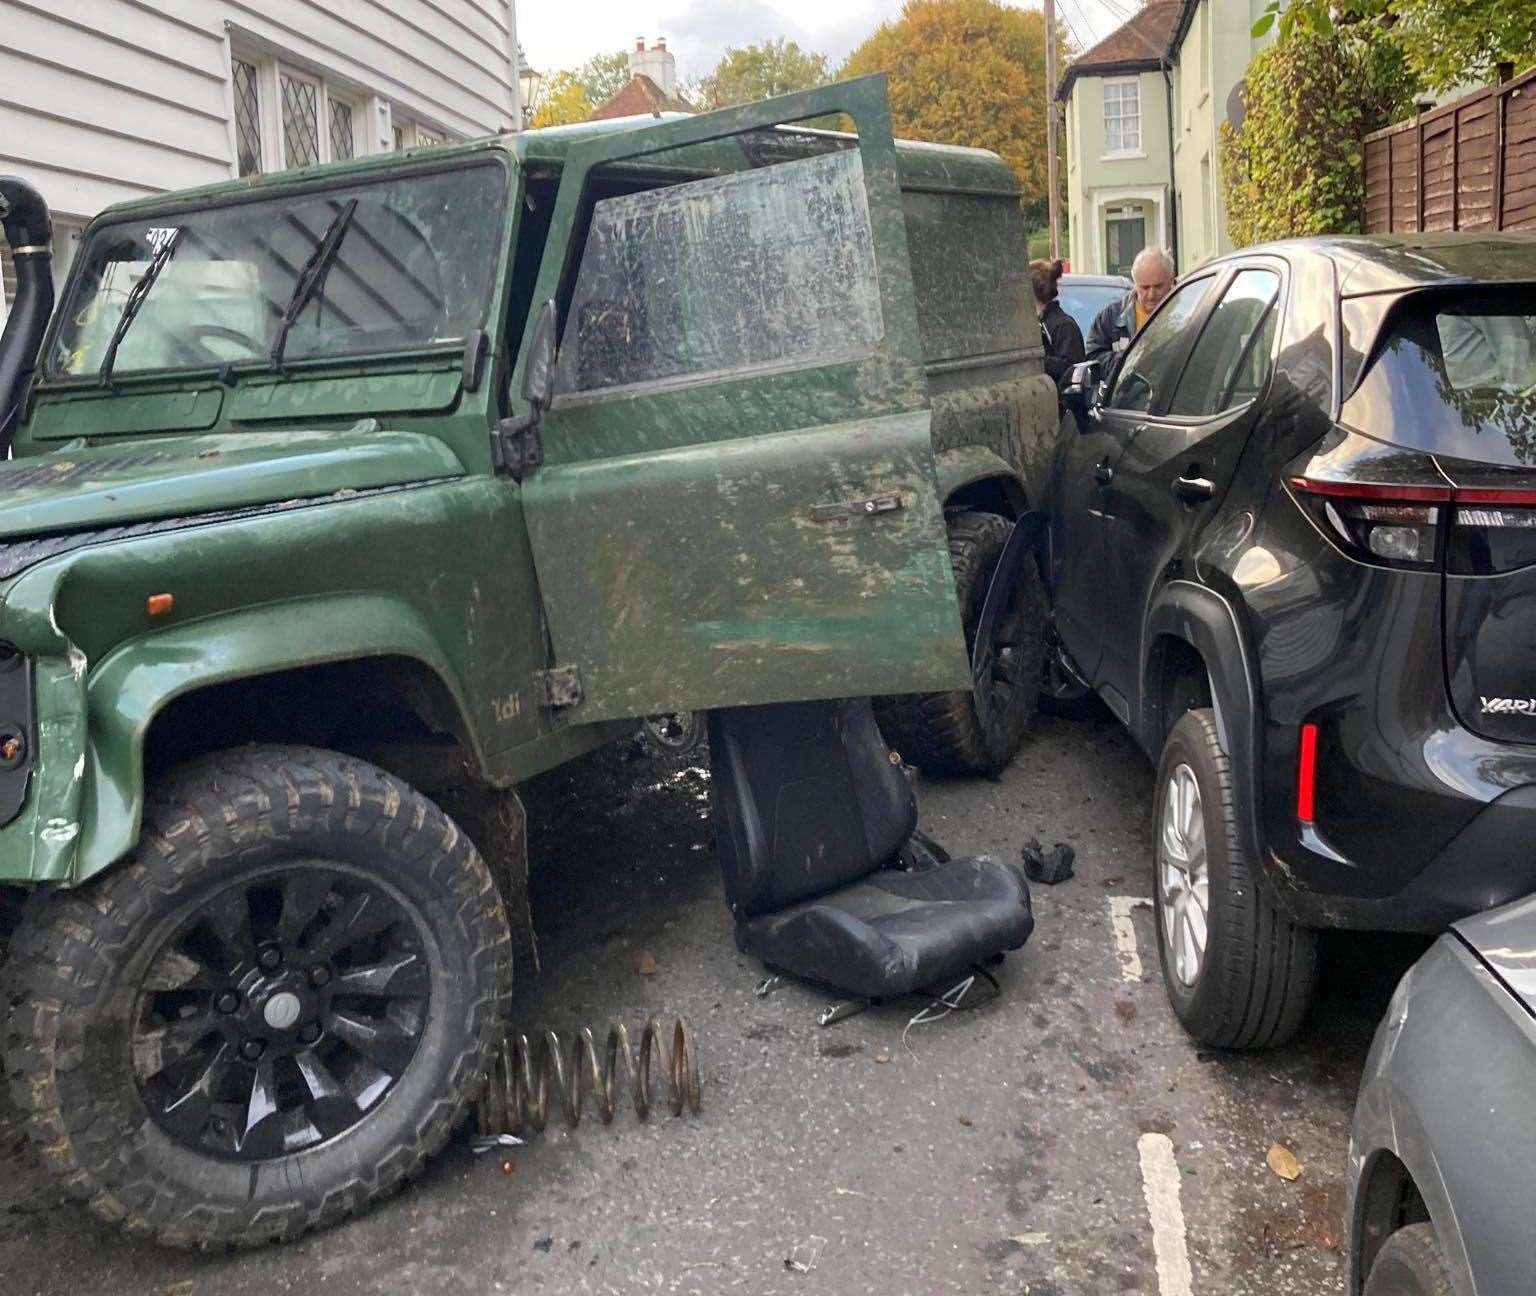 A stolen Land Rover crashed into a house and cars along Farningham High Street